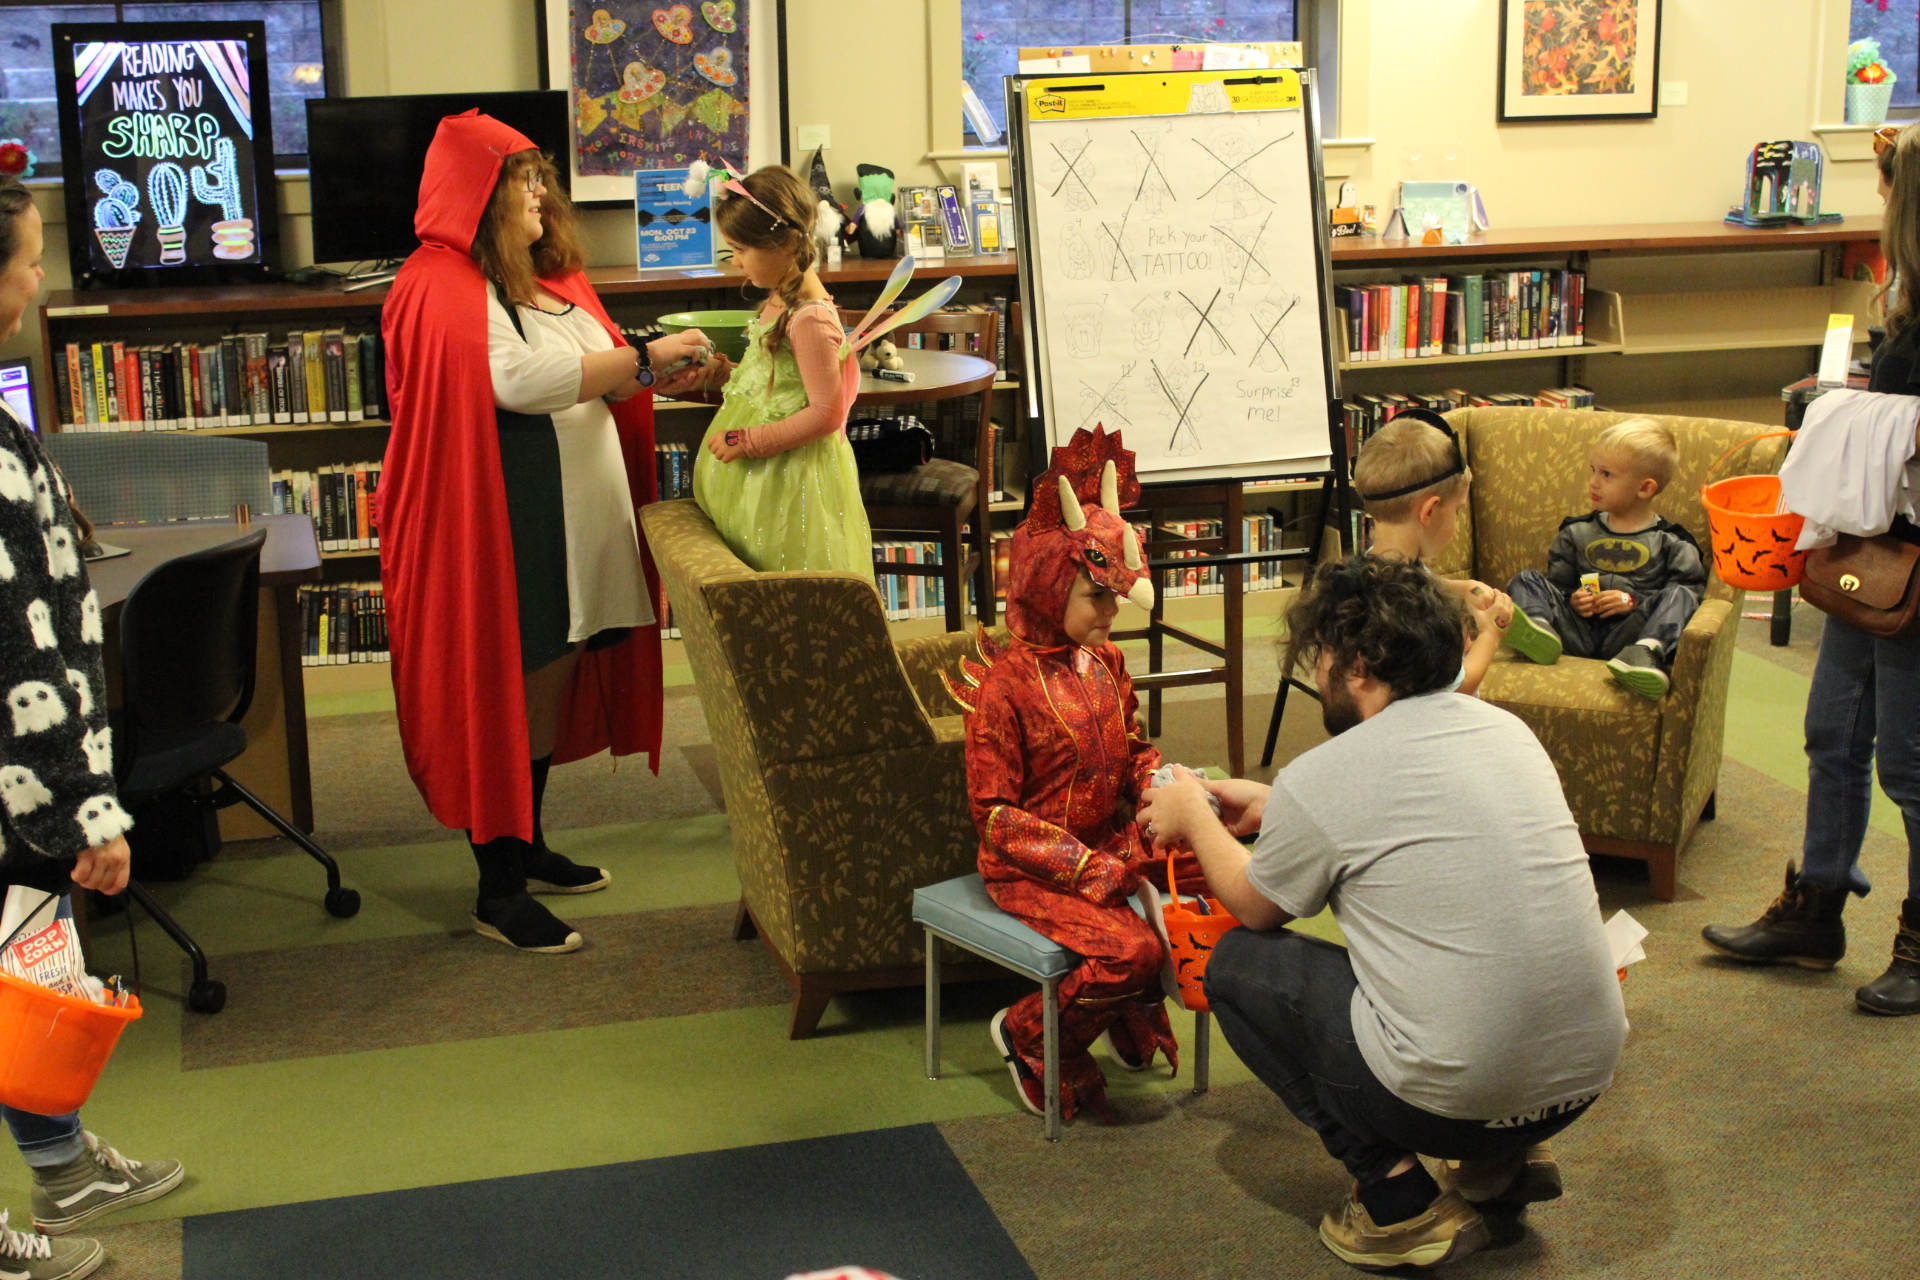 Teen Librarian Megan and Library Programming Assistant Ronnie applying temporary tattoo to costumed children